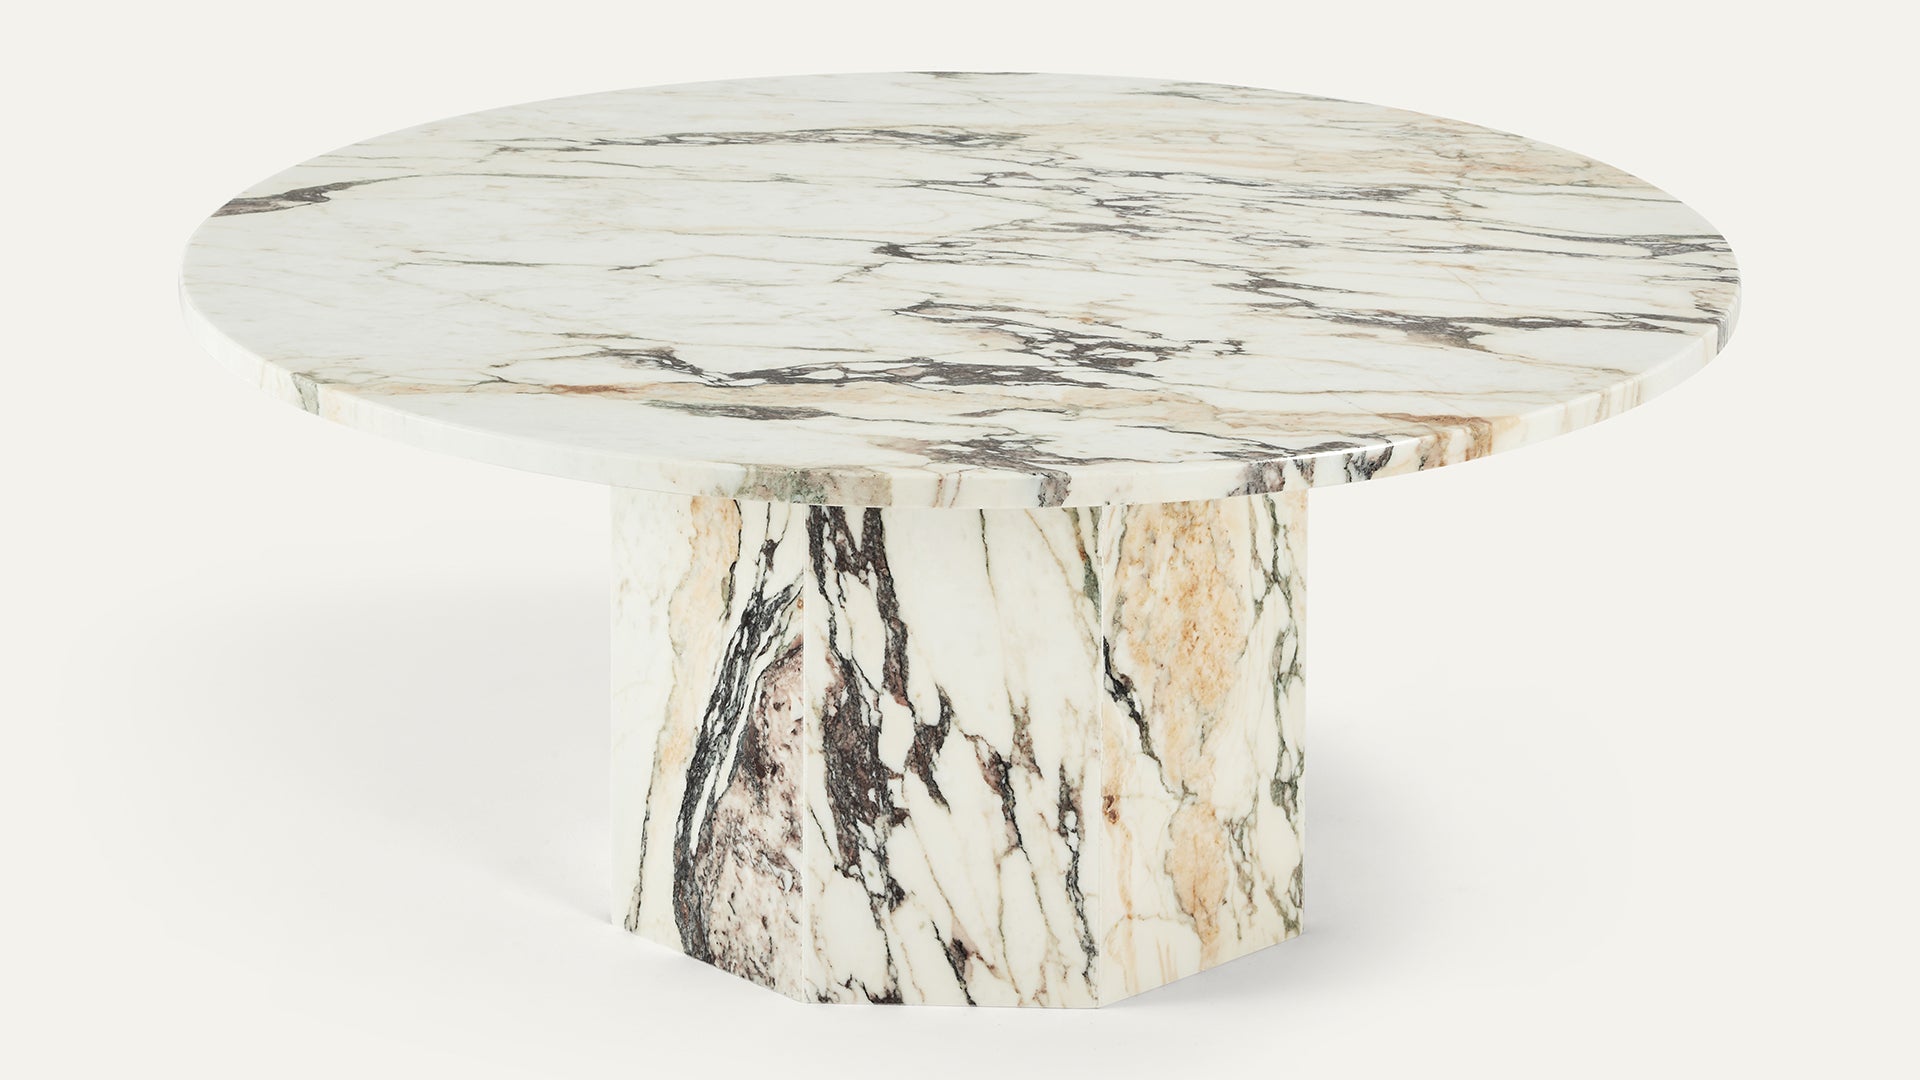 OTTO 90 Coffee Table in Polished Calacatta Monet Marble